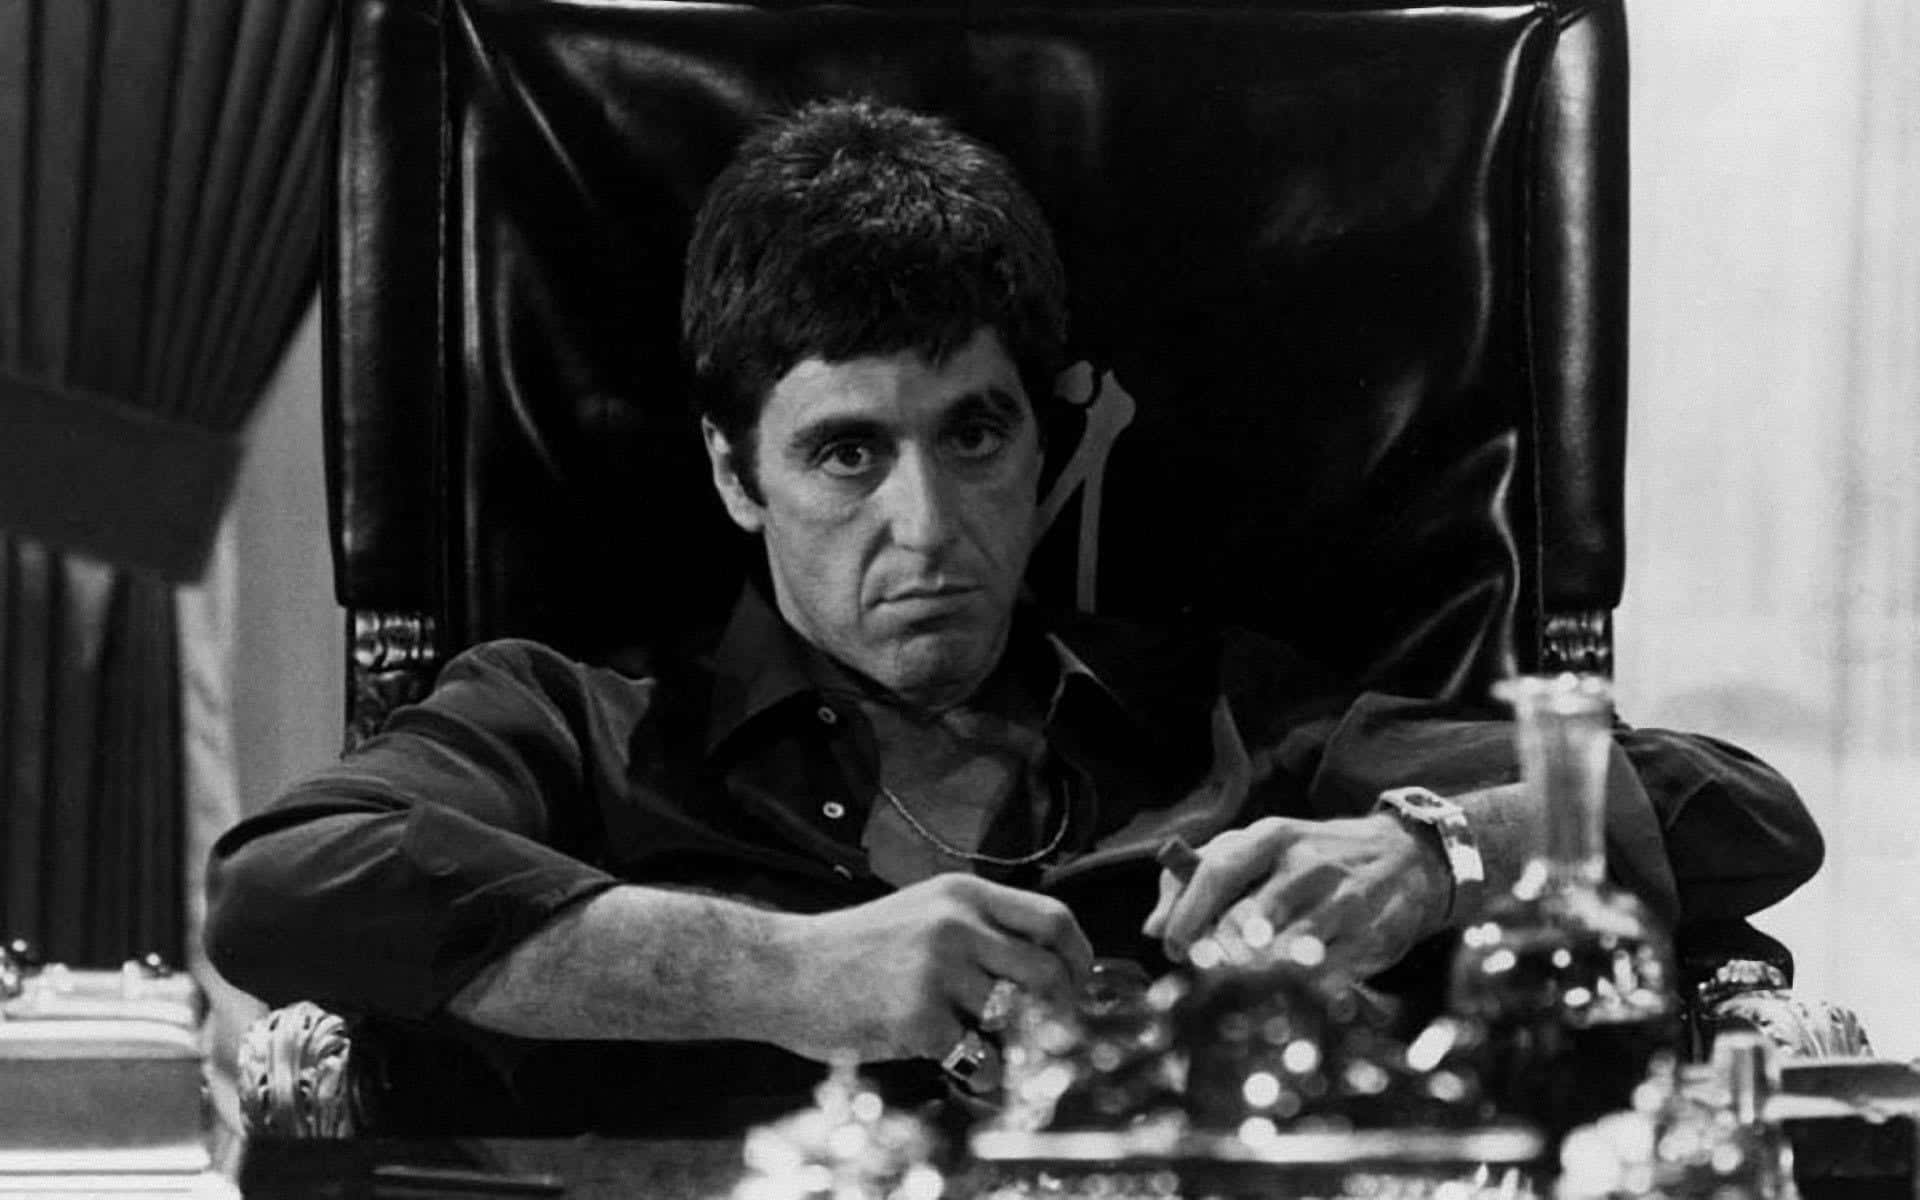 Al Pacino, Star of The Godfather Trilogy